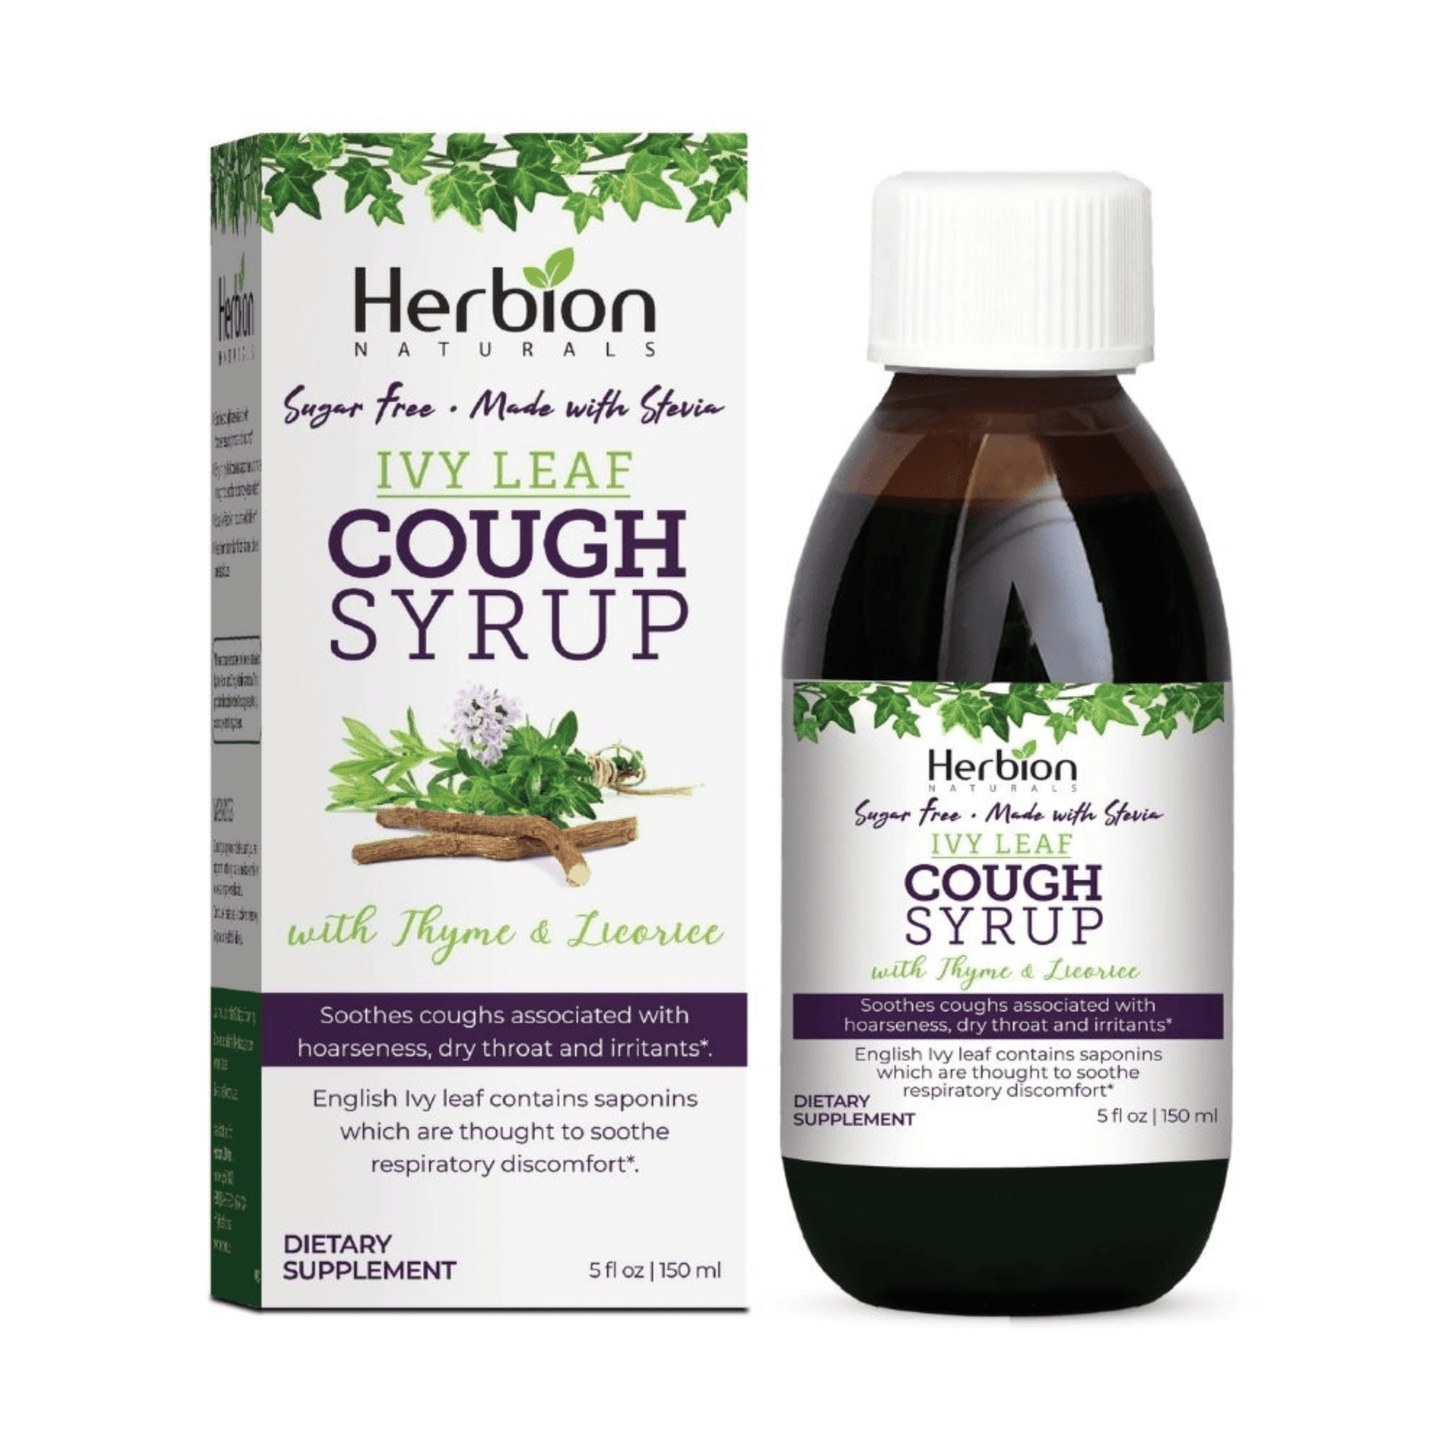 Primary Image of Ivy Leaf Cough Syrup